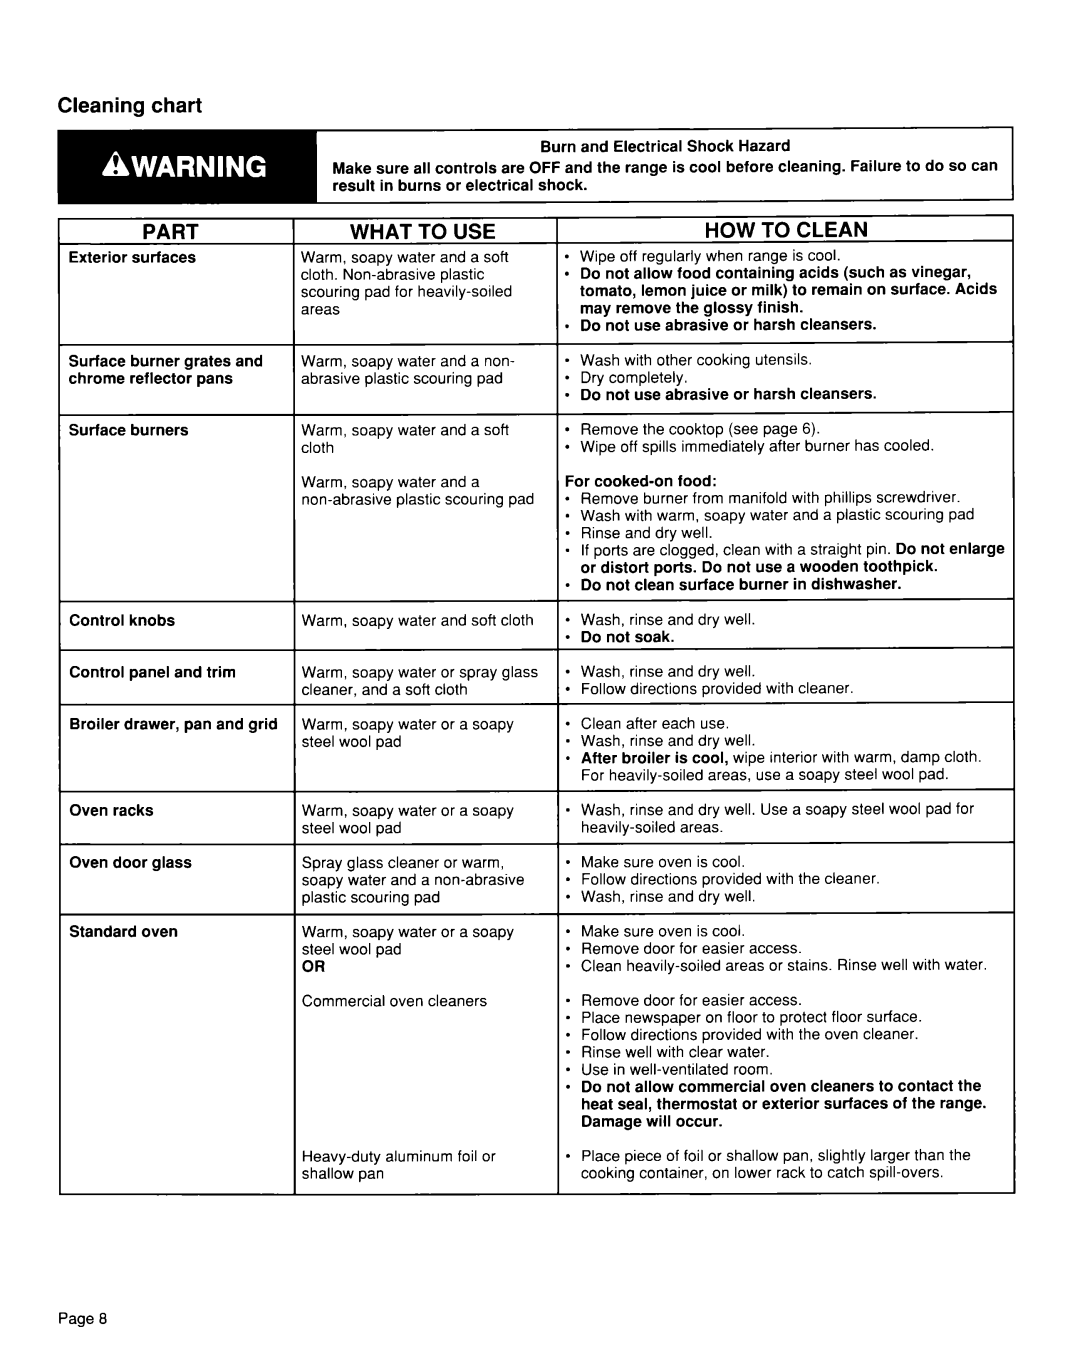 Whirlpool TGR51WOW installation instructions Cleaning chart, Part, What, To Use, How To Clean 